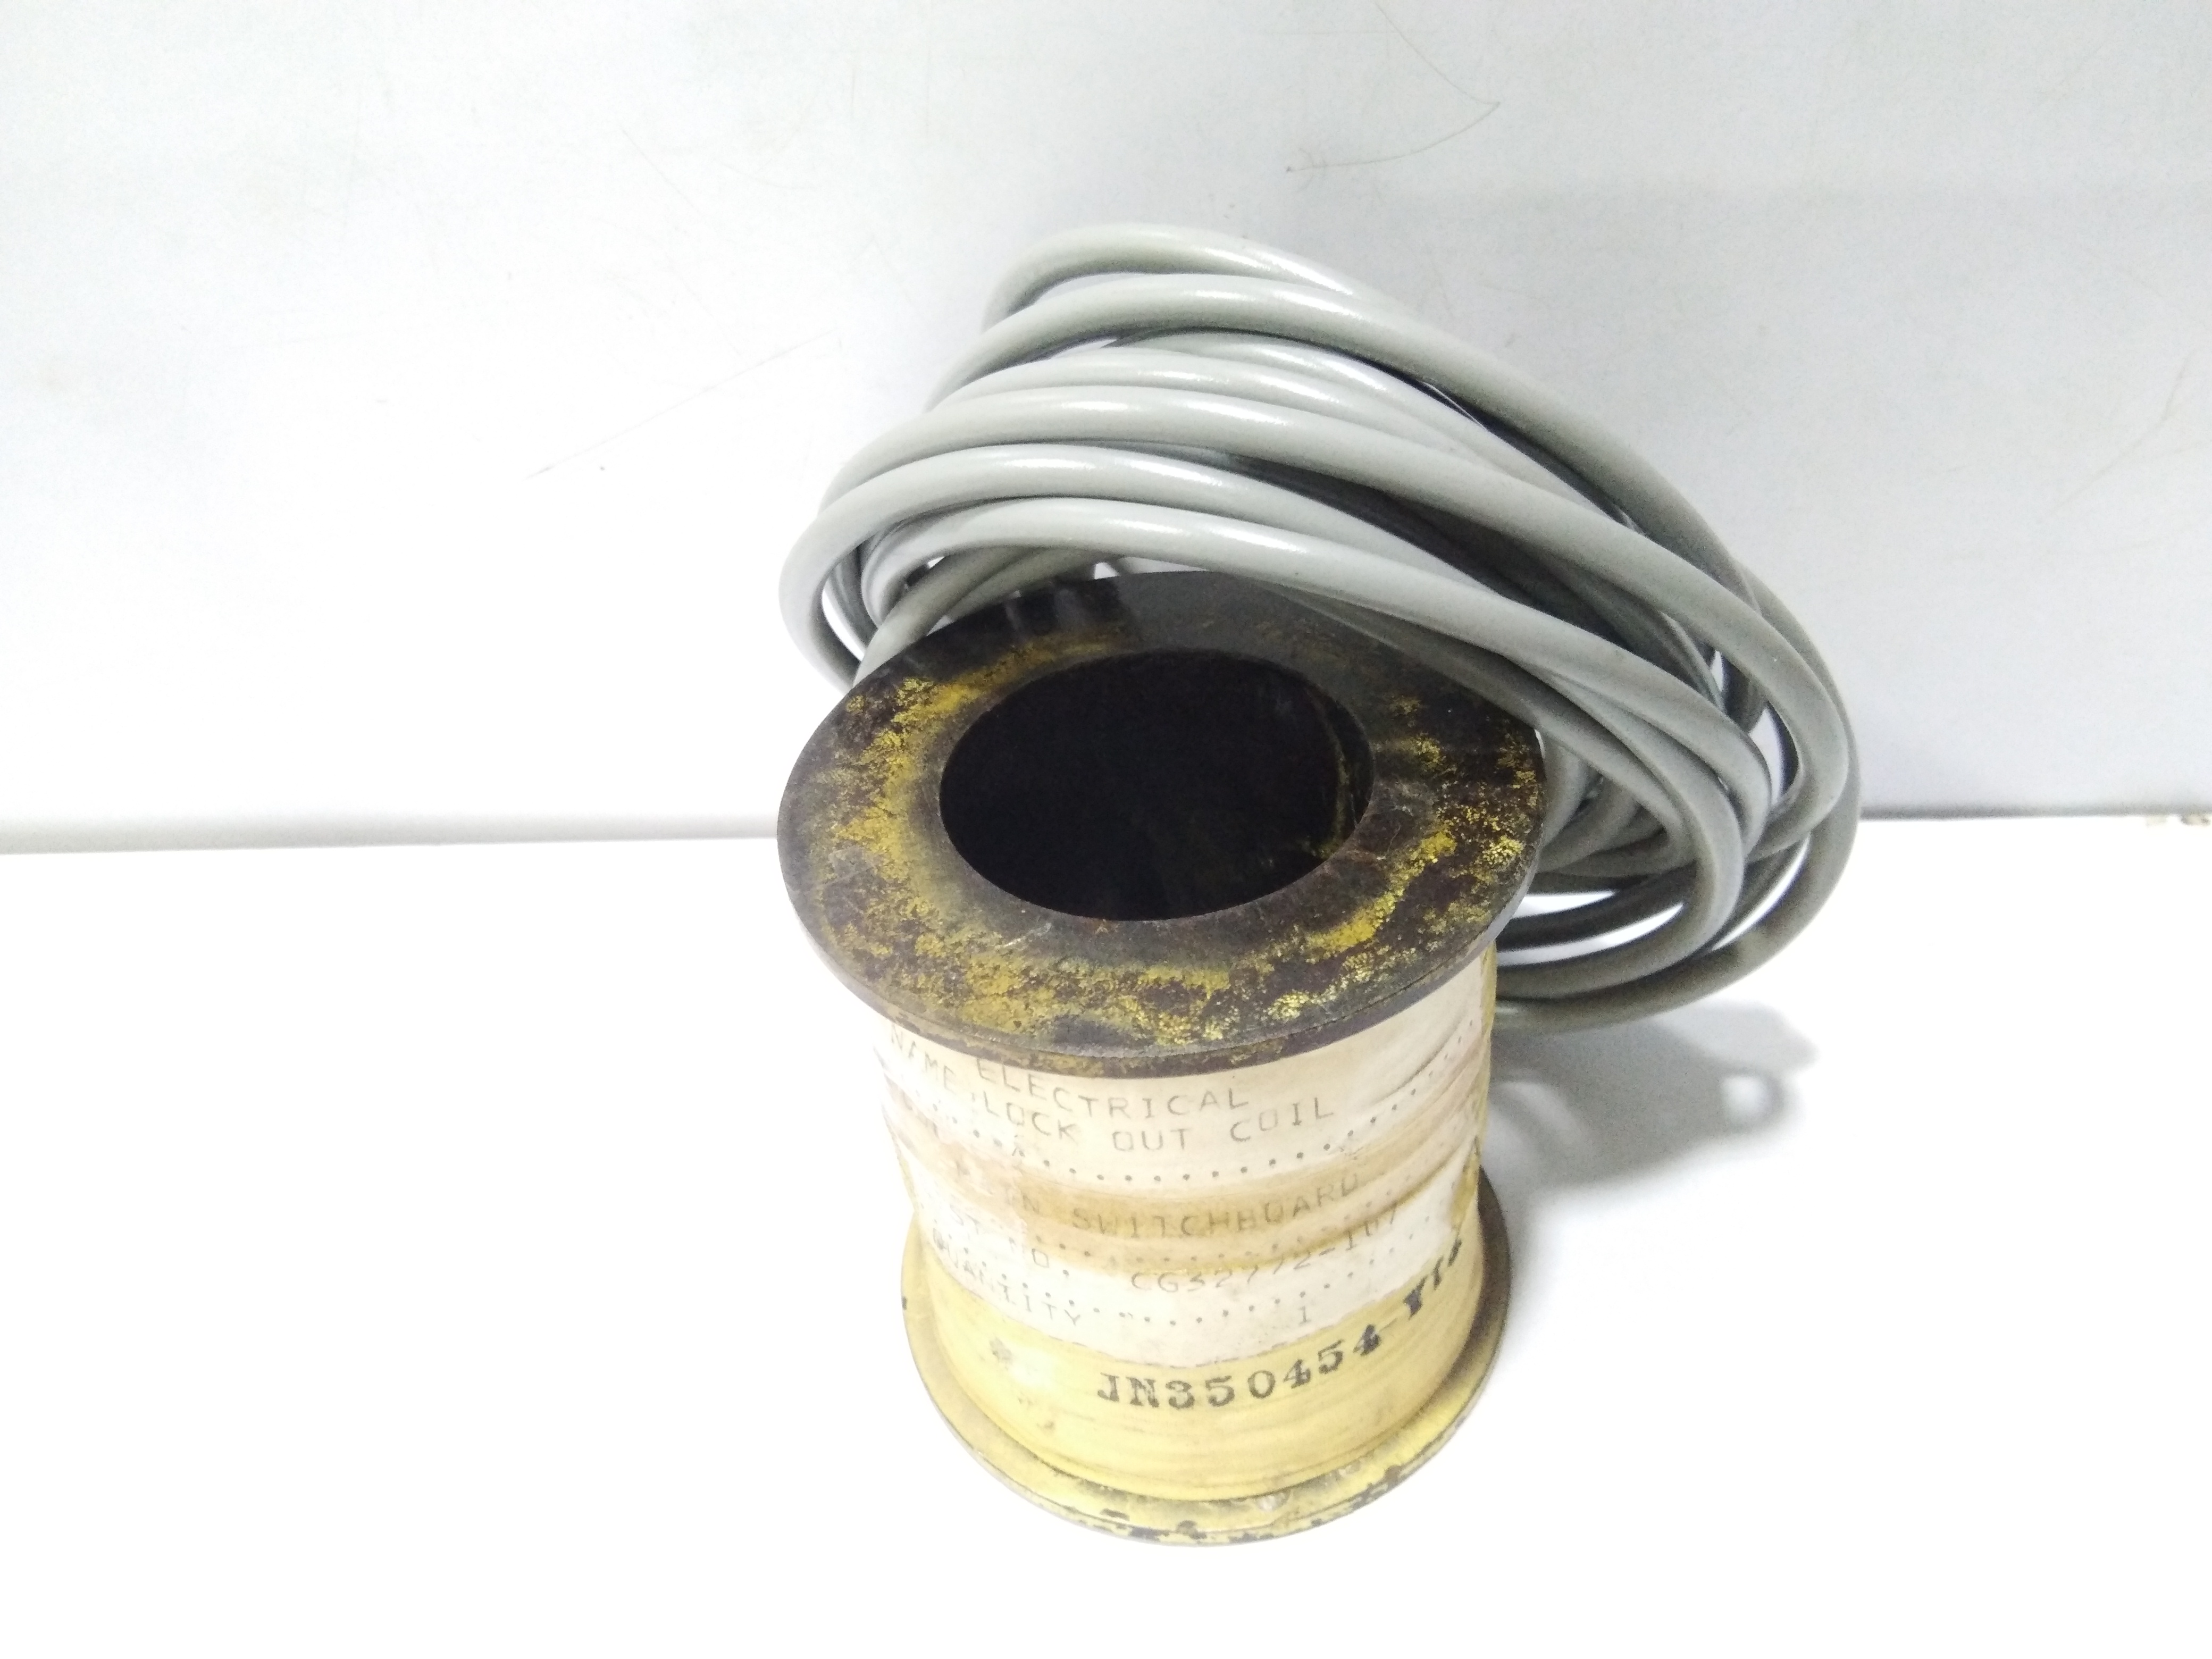 MITSUBISHI JN350454-Y14 LOCK OUT COIL